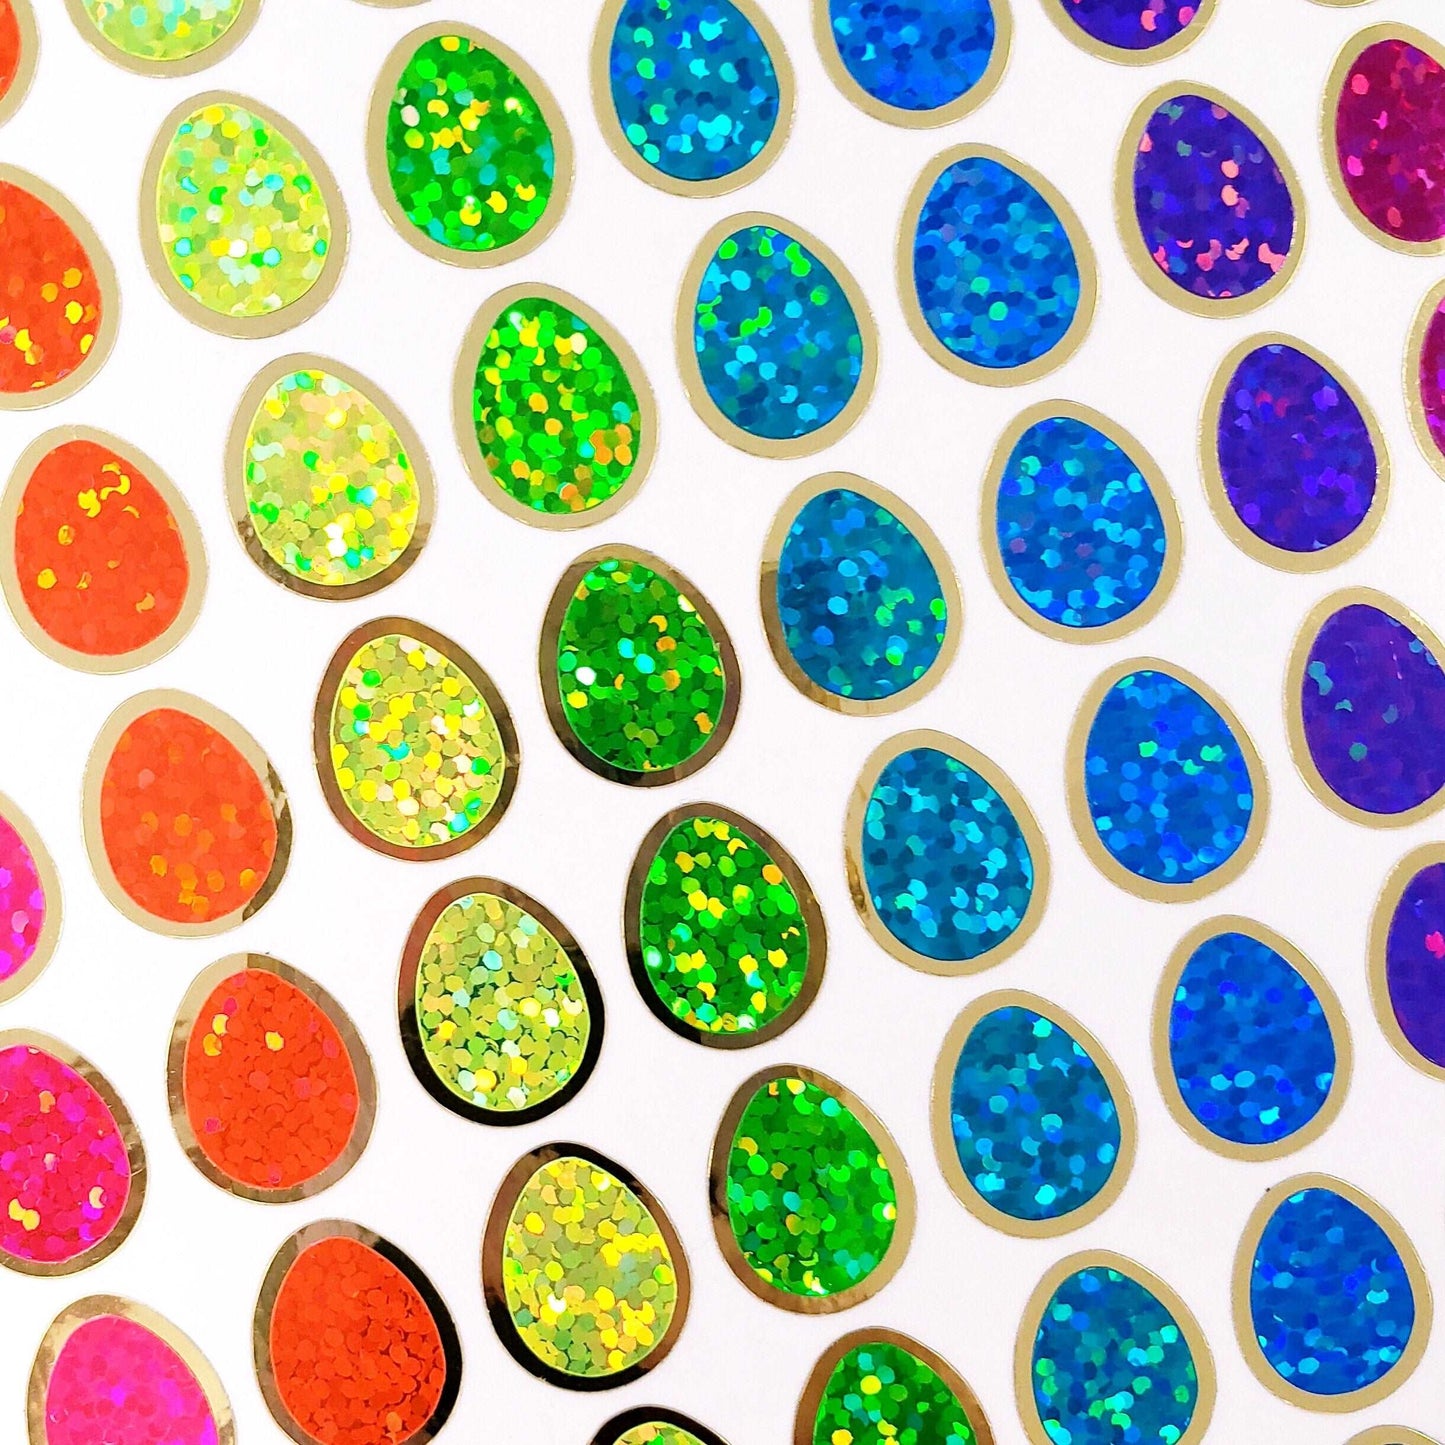 Neon and Gold Easter Egg Stickers, set of 80 small eggs for invitations, envelopes, scrapbook page embellishments, sticker gift for kids